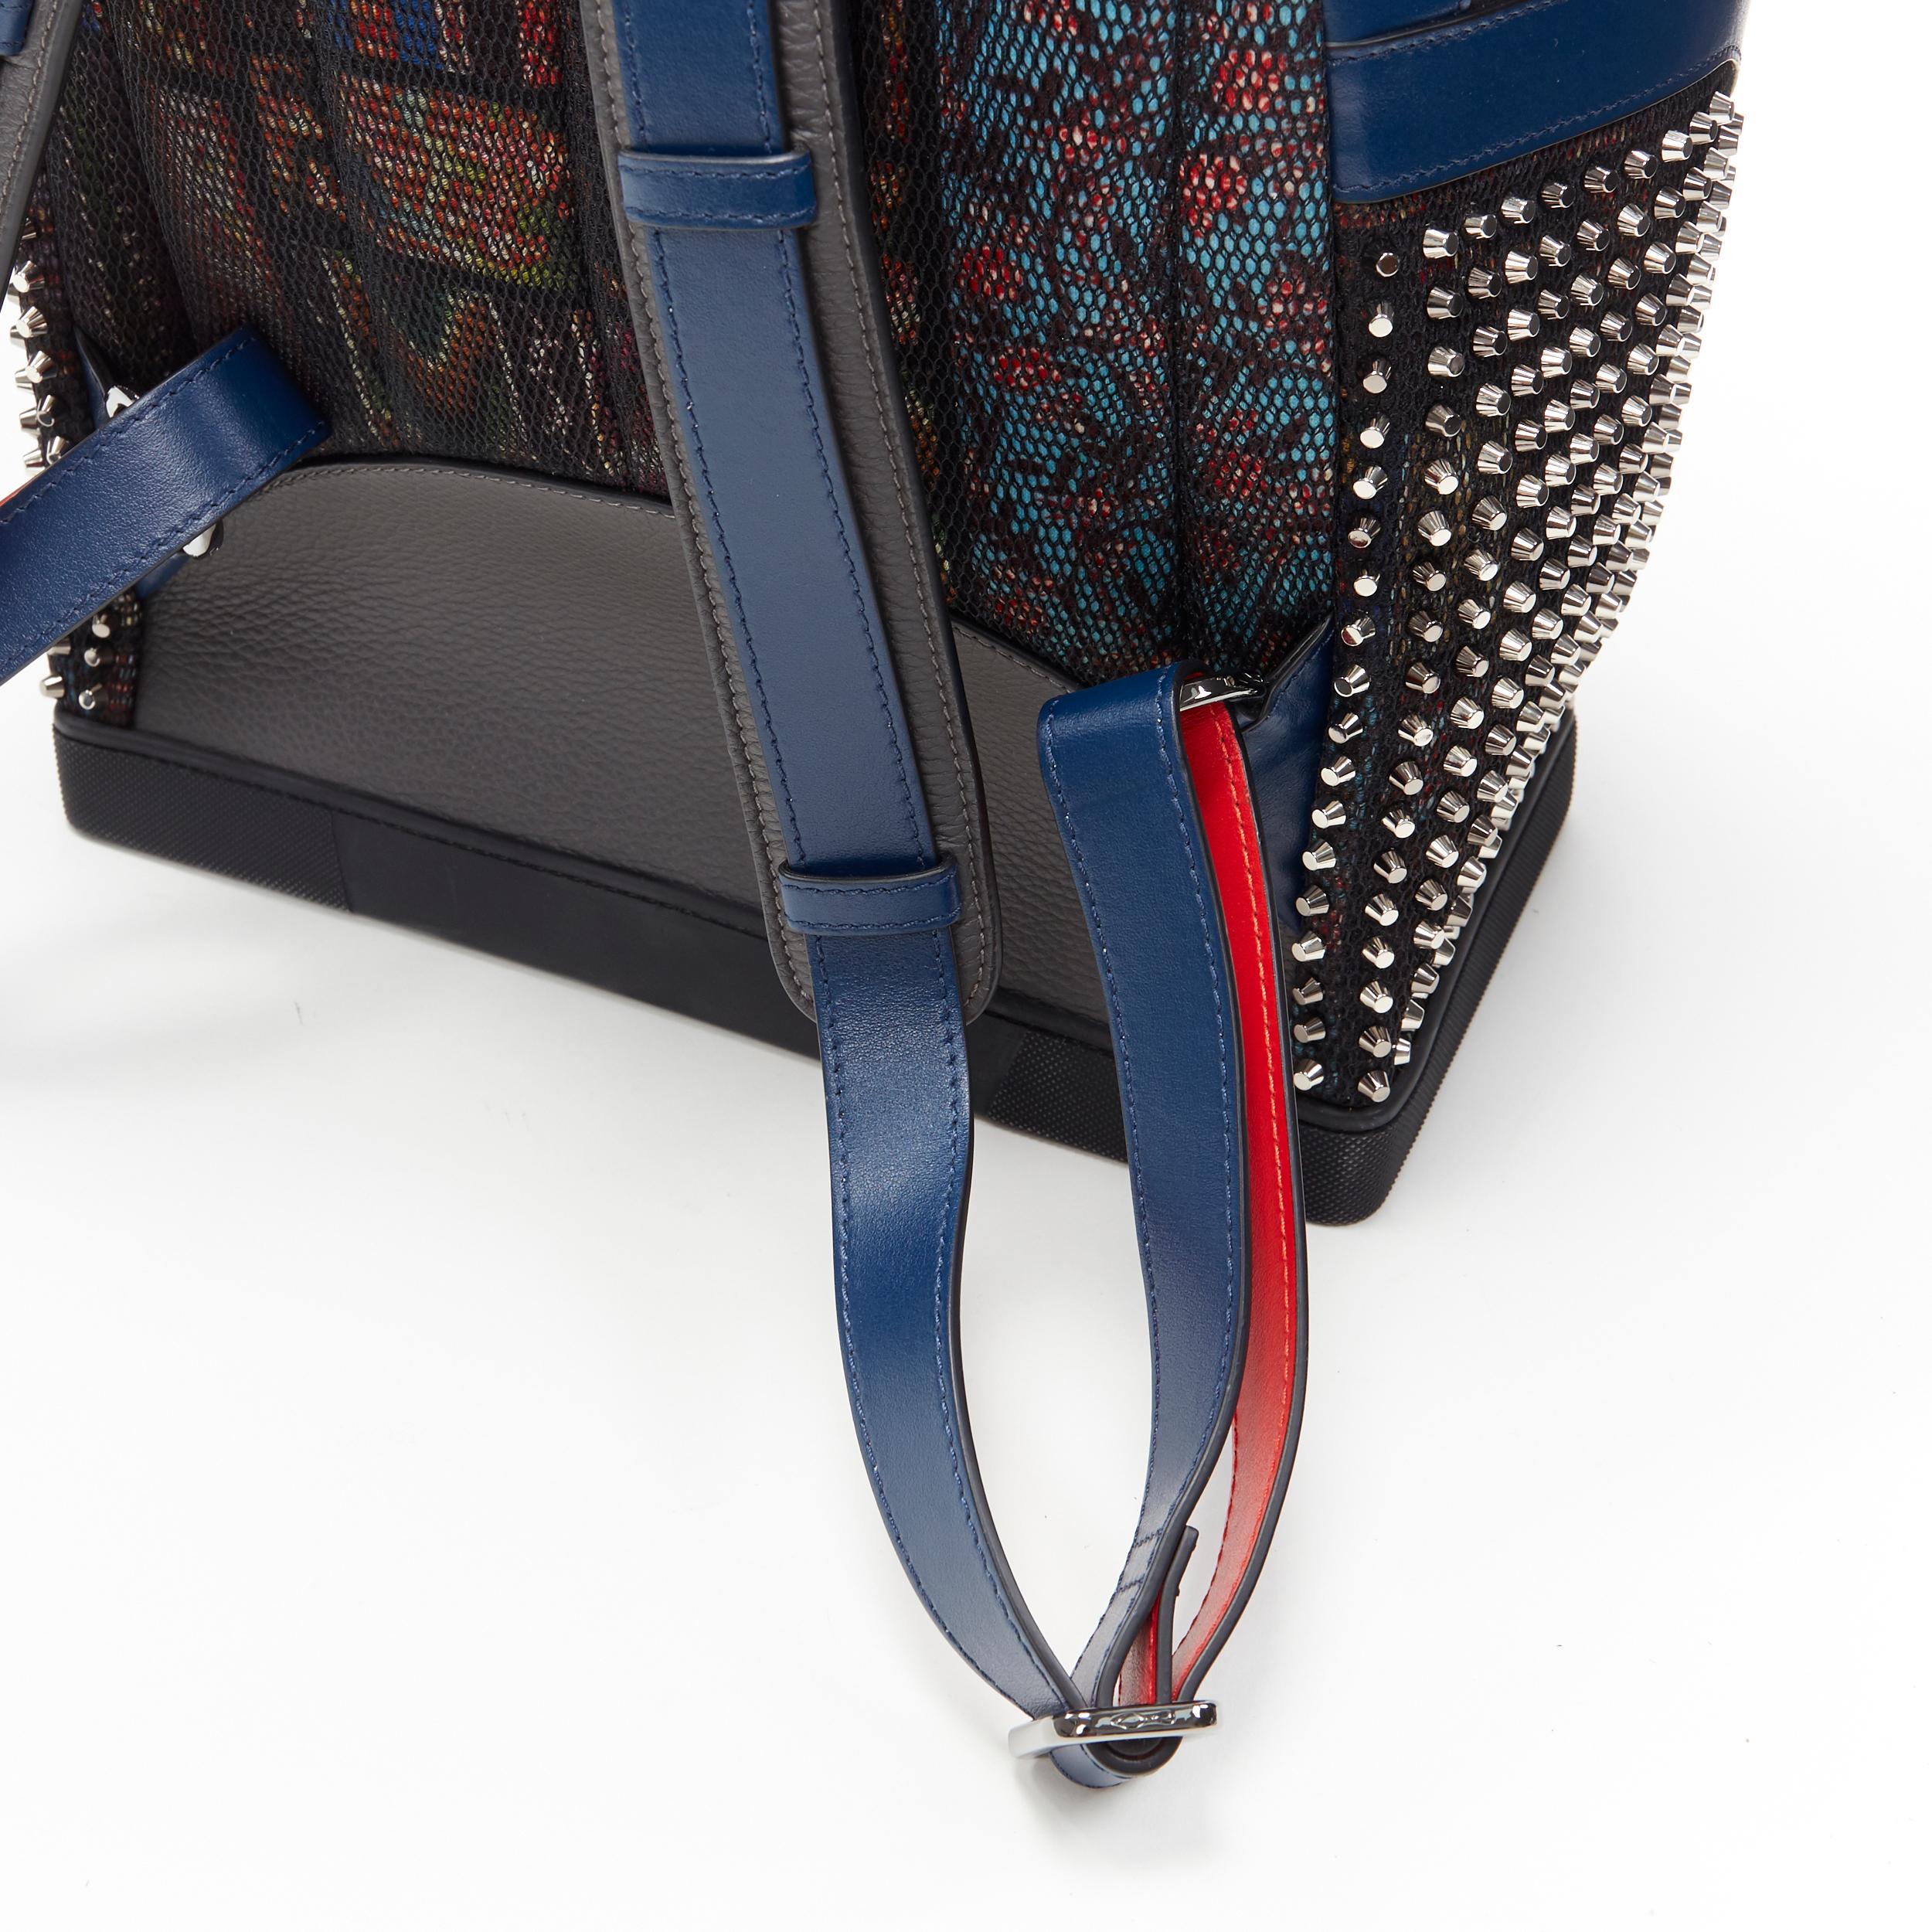 CHRISTIAN LOUBOUTIN Explorafunk studded printed mesh leather trimmed backpack 2